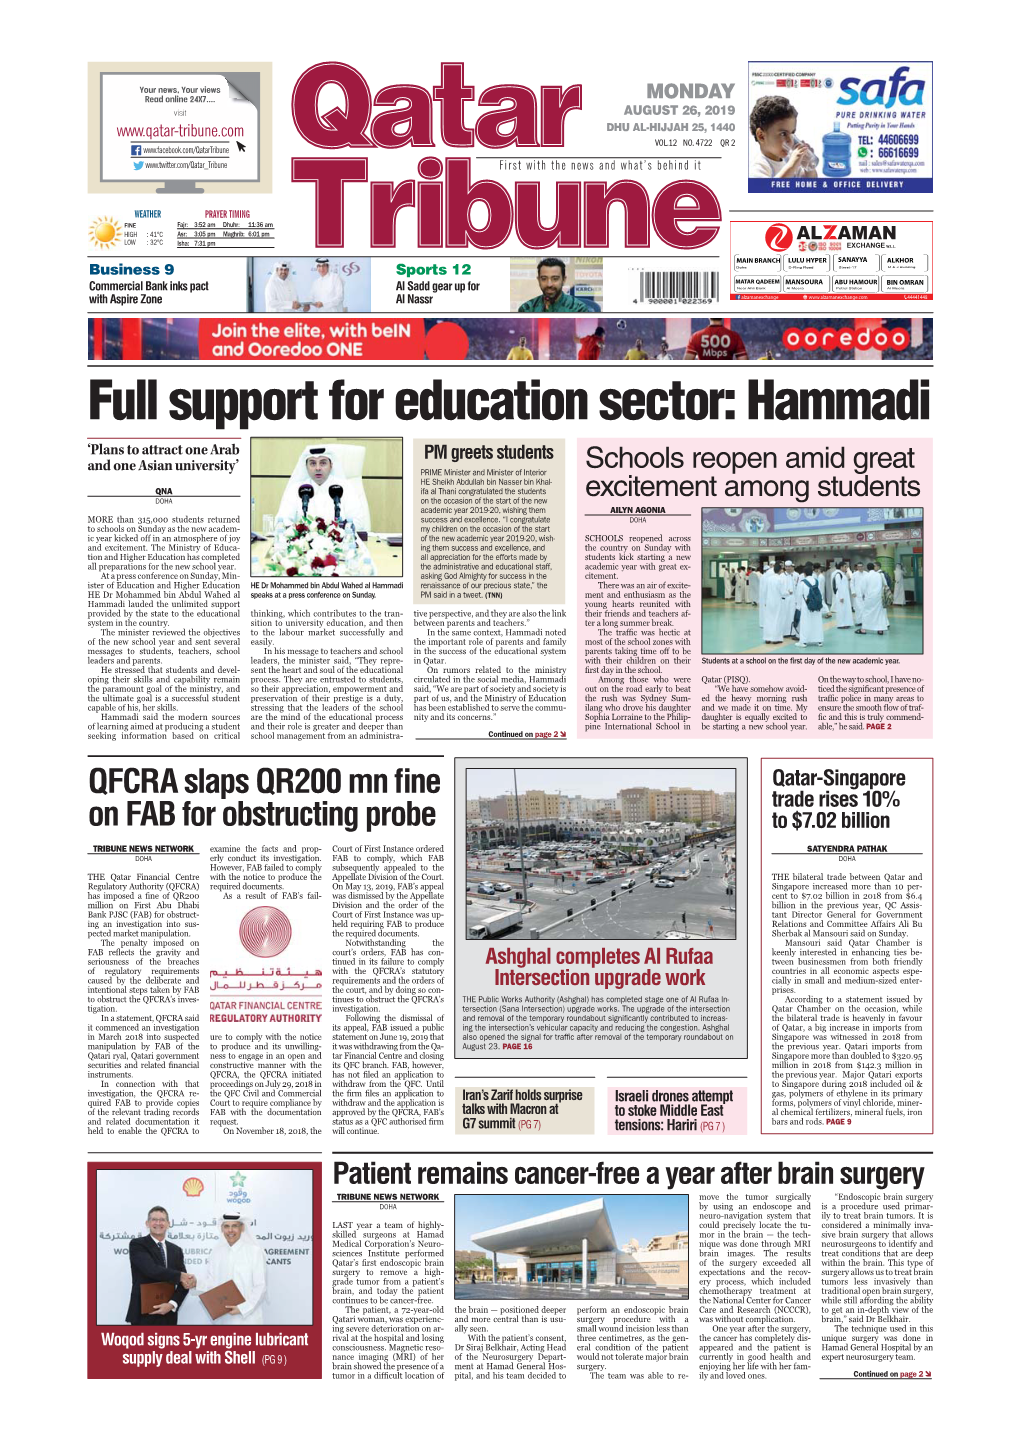 Full Support for Education Sector